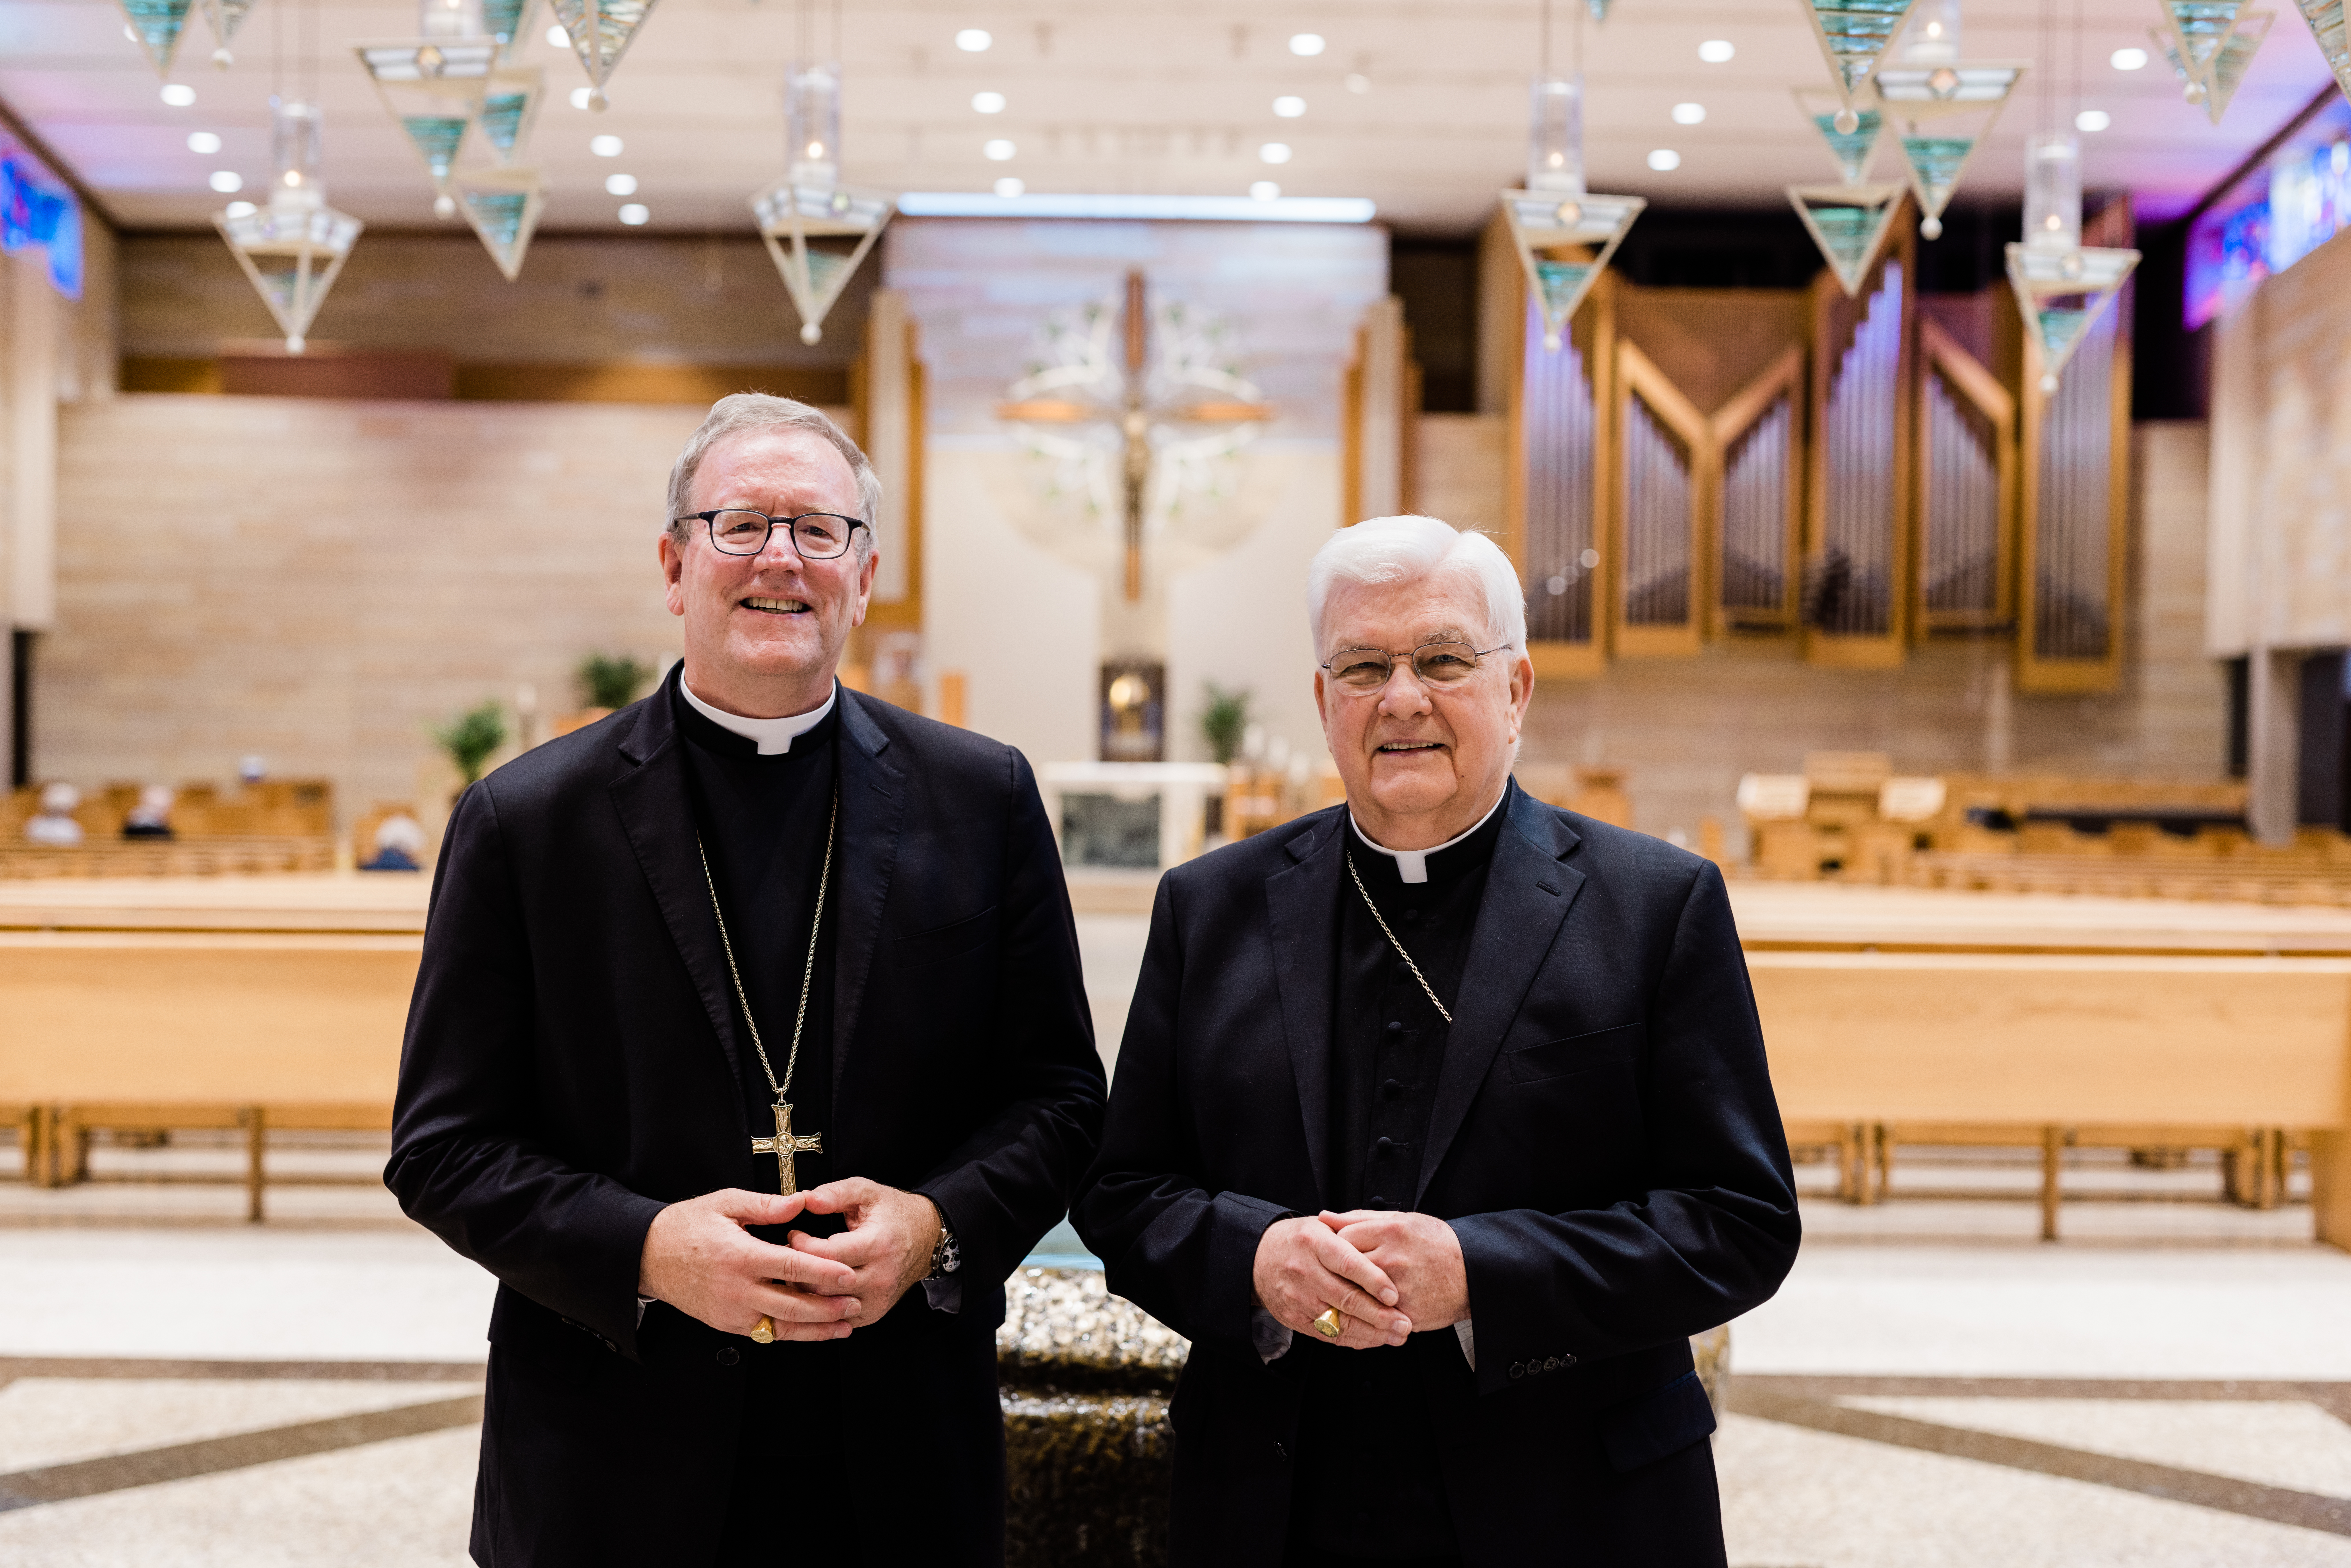 Bishop Barron, Bishop designate of the Diocese of Winona-Rochester with Bishop John M. Quinn, Eighth Bishop of the Diocese of Winona-Rochester